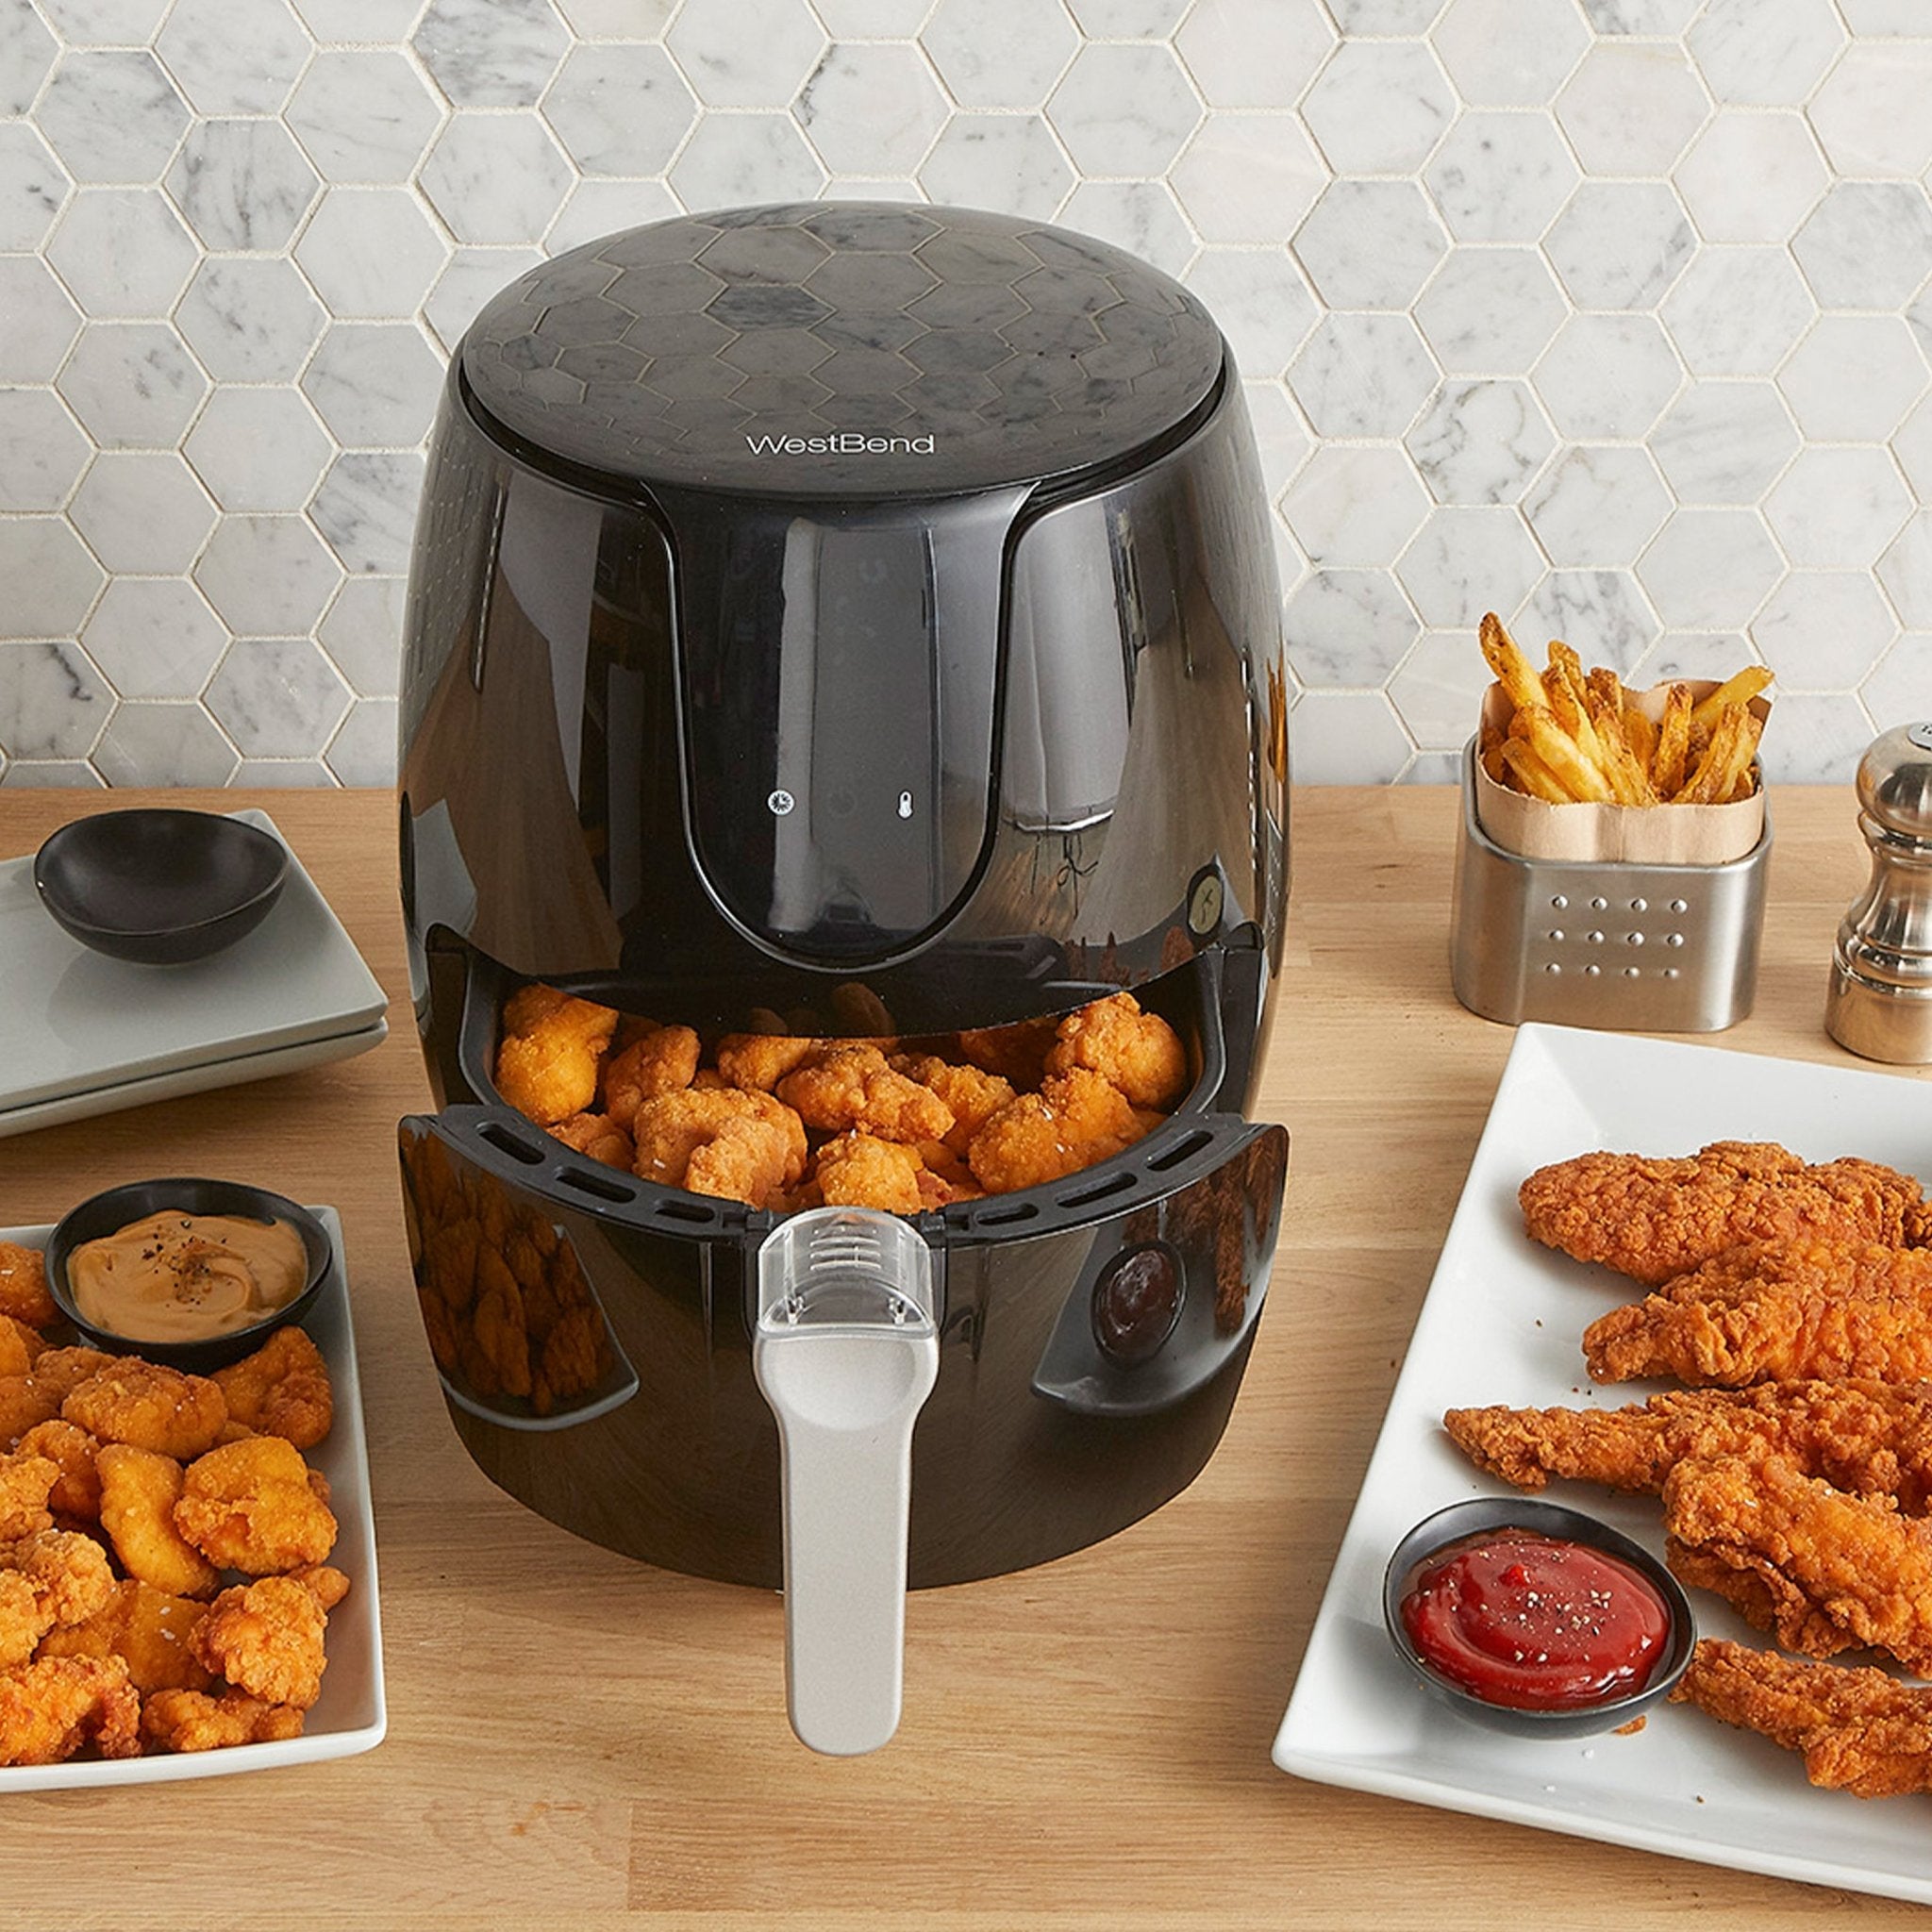  West Bend Air Fryer 7-Quart Capacity with Digital Controls View  Window and 13 Cooking Presets, Nonstick Frying Basket, 1700-Watts, Black :  Home & Kitchen